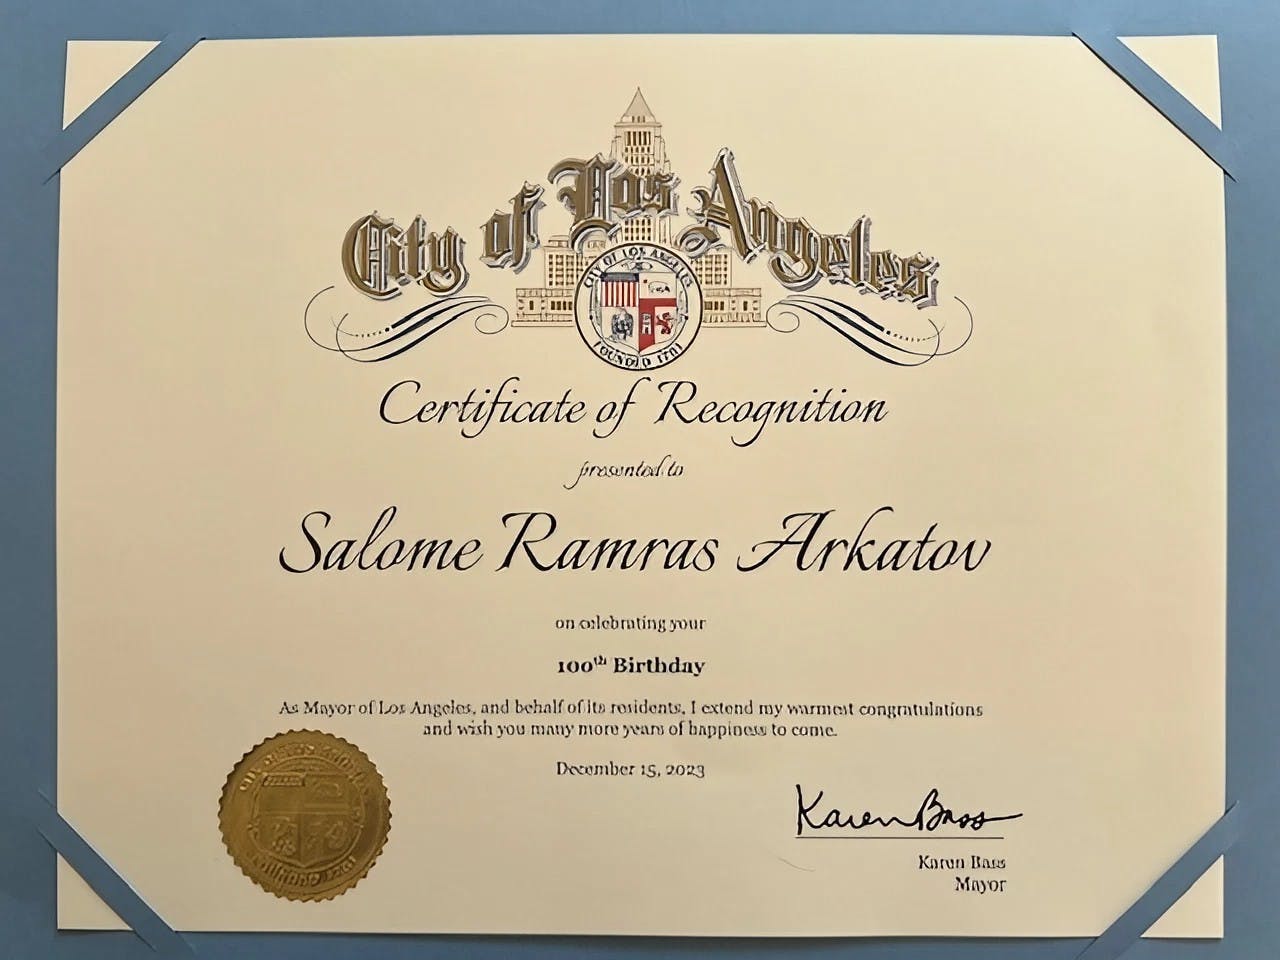 Proclamation from Karen Bass, Mayor of Los Angeles